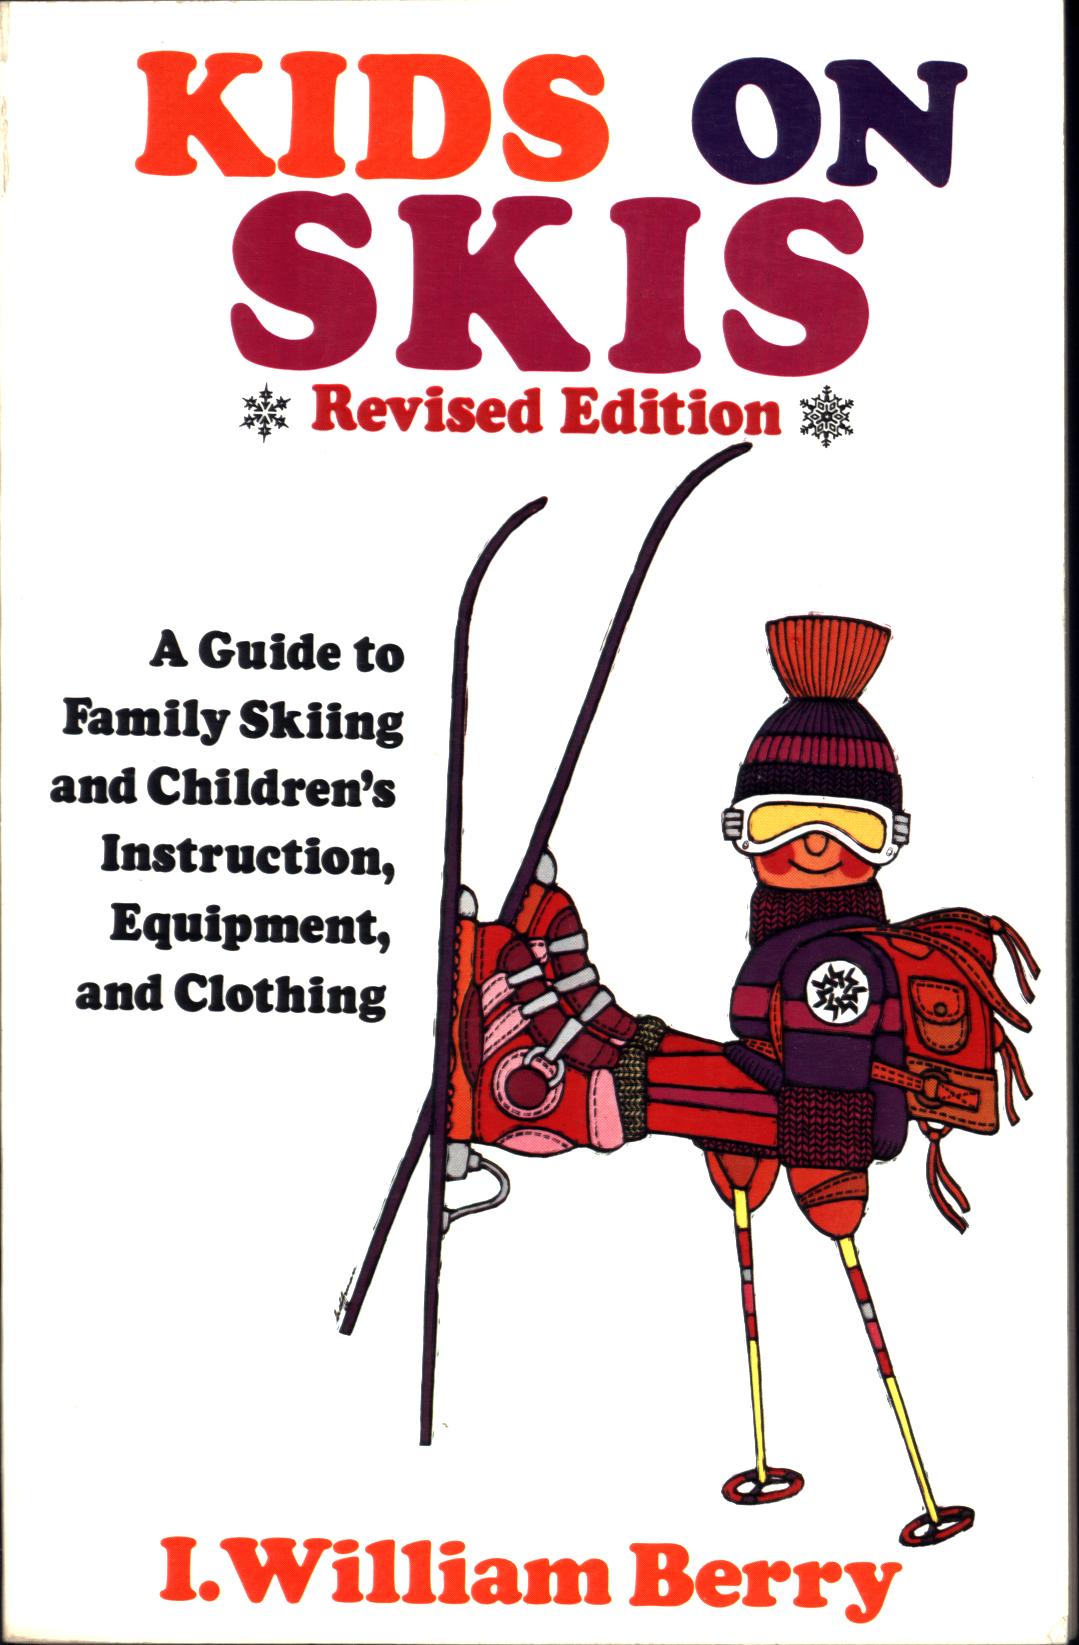 KIDS ON SKIS: a guide to family skiing and children's instruction, equipment, and clothing.